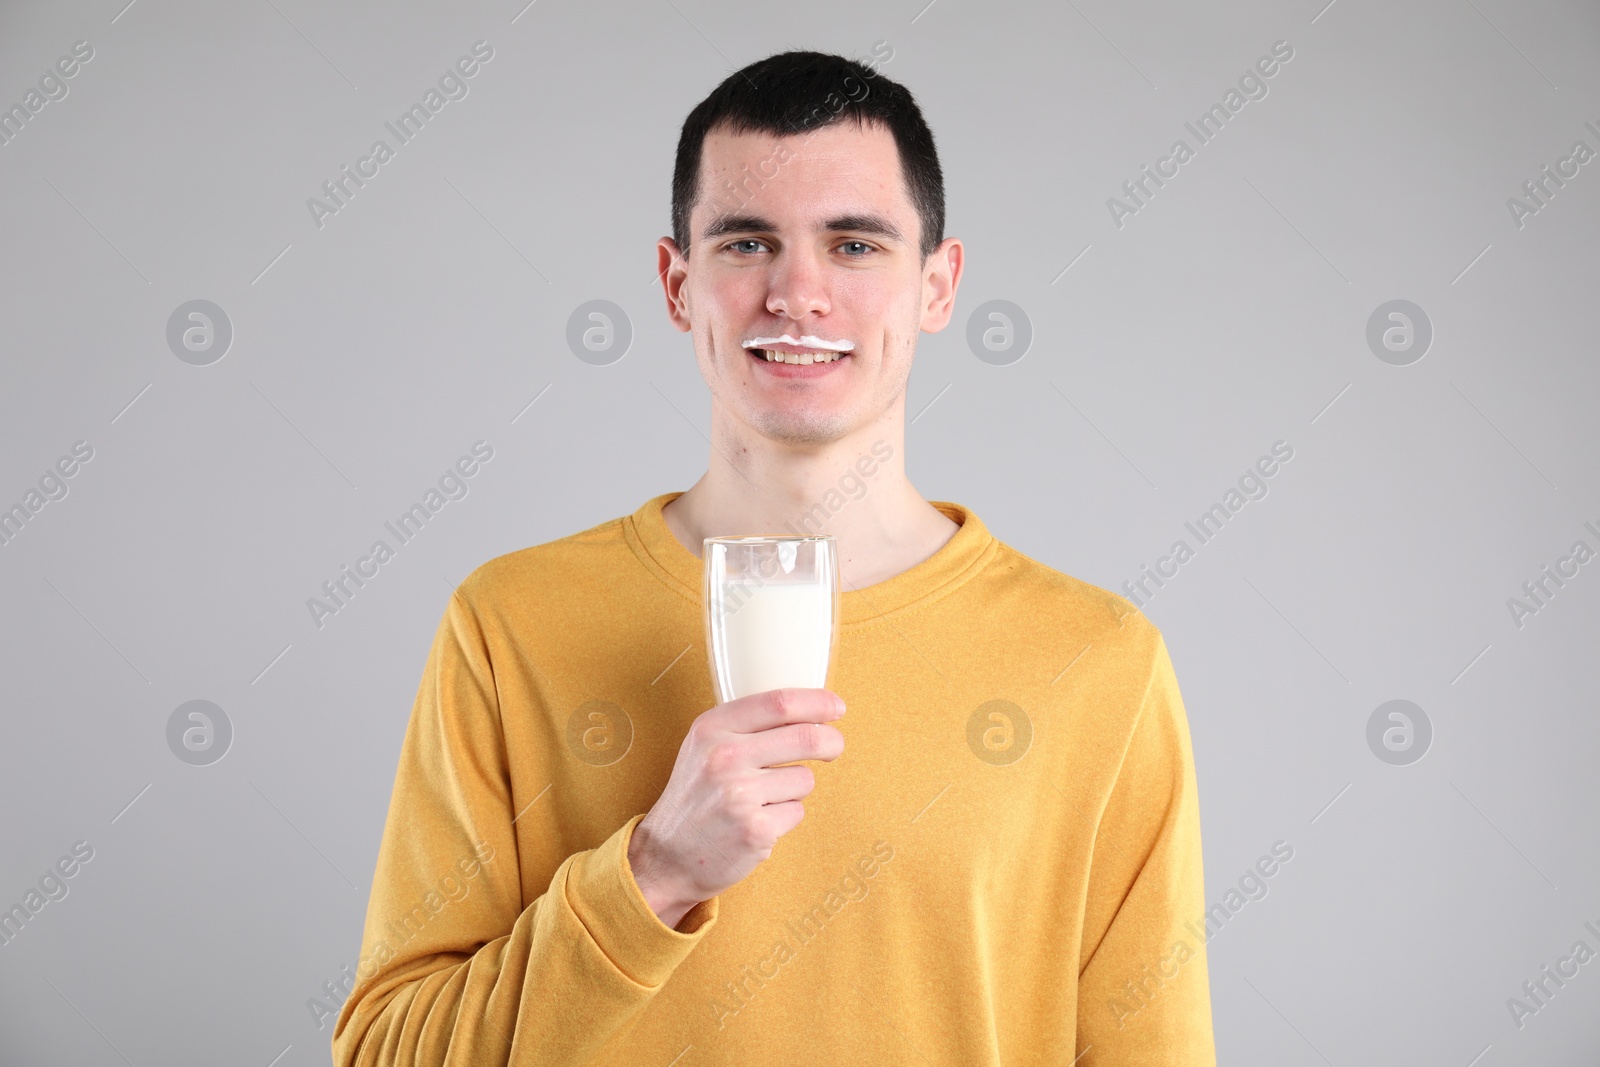 Photo of Happy man with milk mustache holding glass of tasty dairy drink on gray background